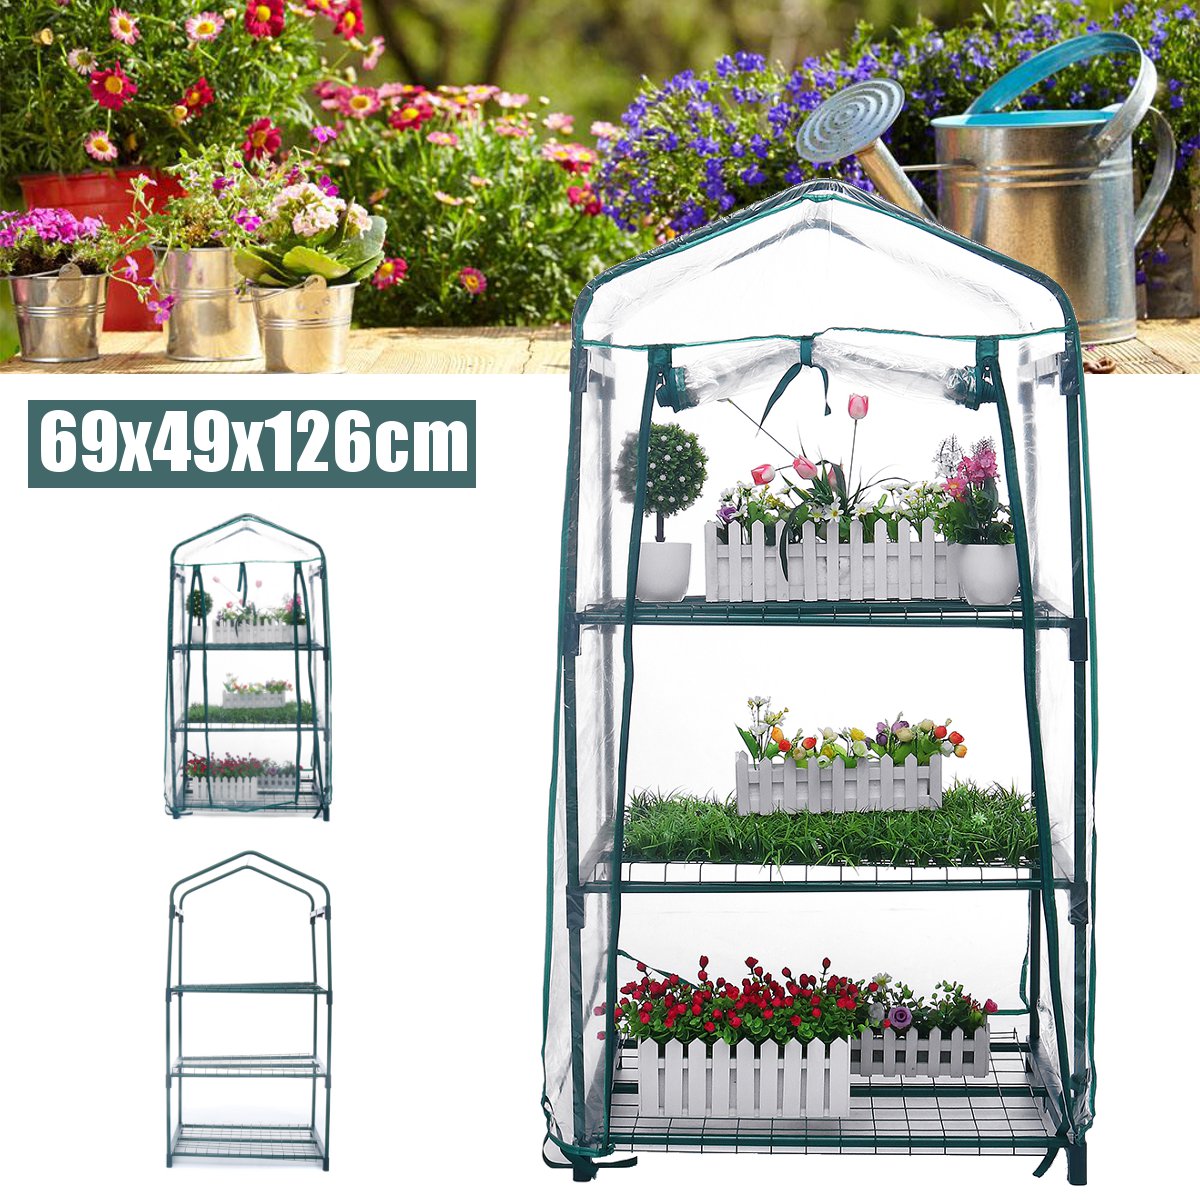 Mini-Greenhouse-AUEDW-3-Shelves-IndoorOutdoor-Greenhouse-with-Zippered-Cover-and-Metal-Shelves-for-G-1592630-2